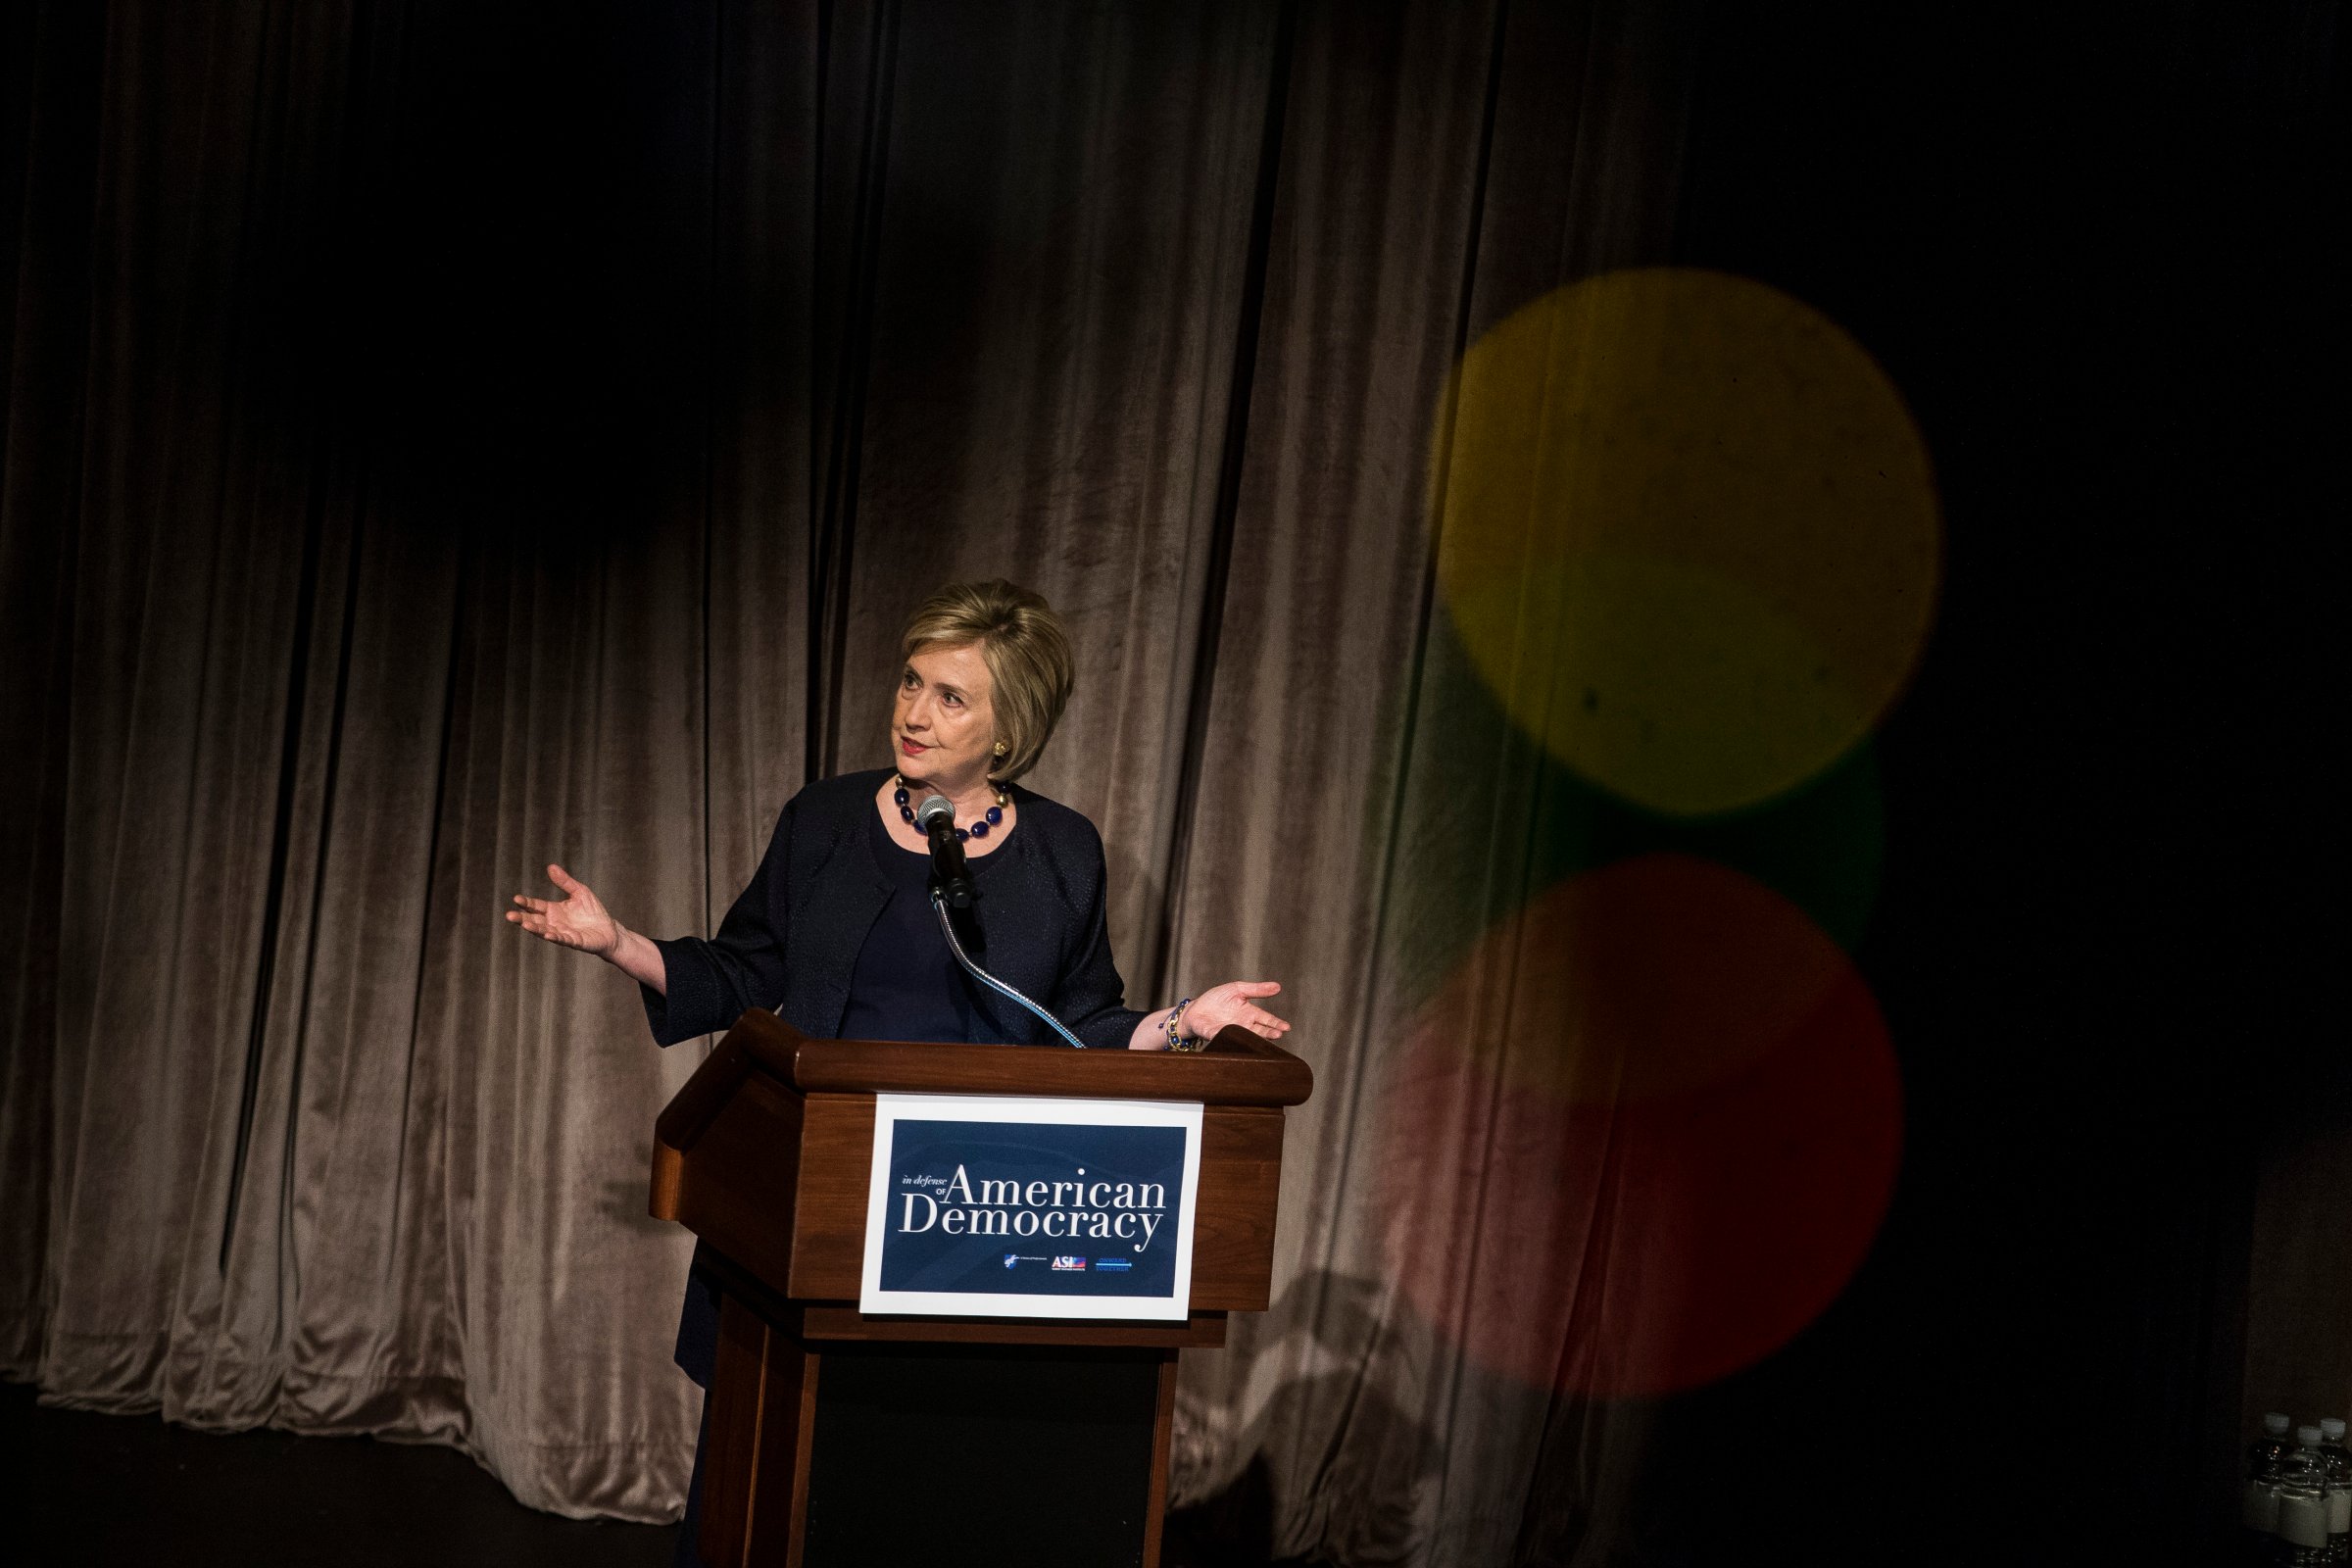 Hillary Clinton Gives Keynote Address At The American Federation Of Teachers' Shanker Institute In Defense Of Democracy Forum